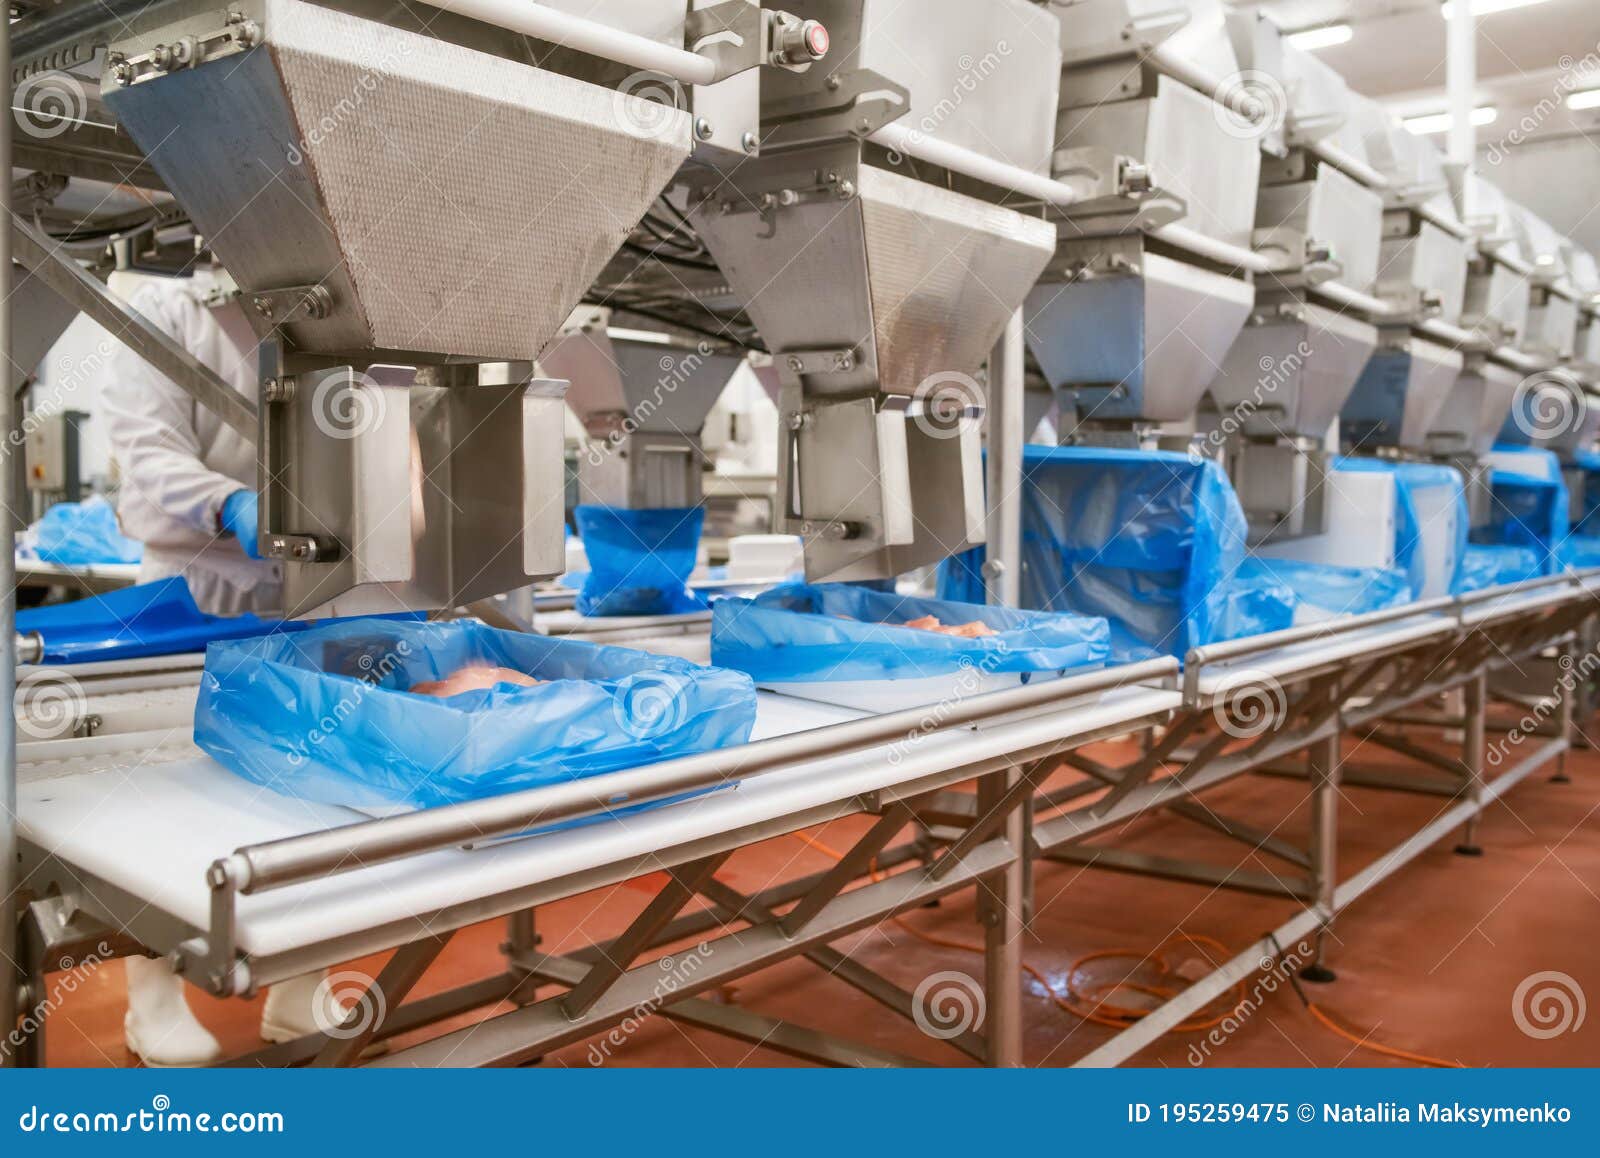 https://thumbs.dreamstime.com/z/industrial-equipment-meat-factory-meat-processing-plant-meat-processing-equipment-production-line-packaging-cutting-195259475.jpg